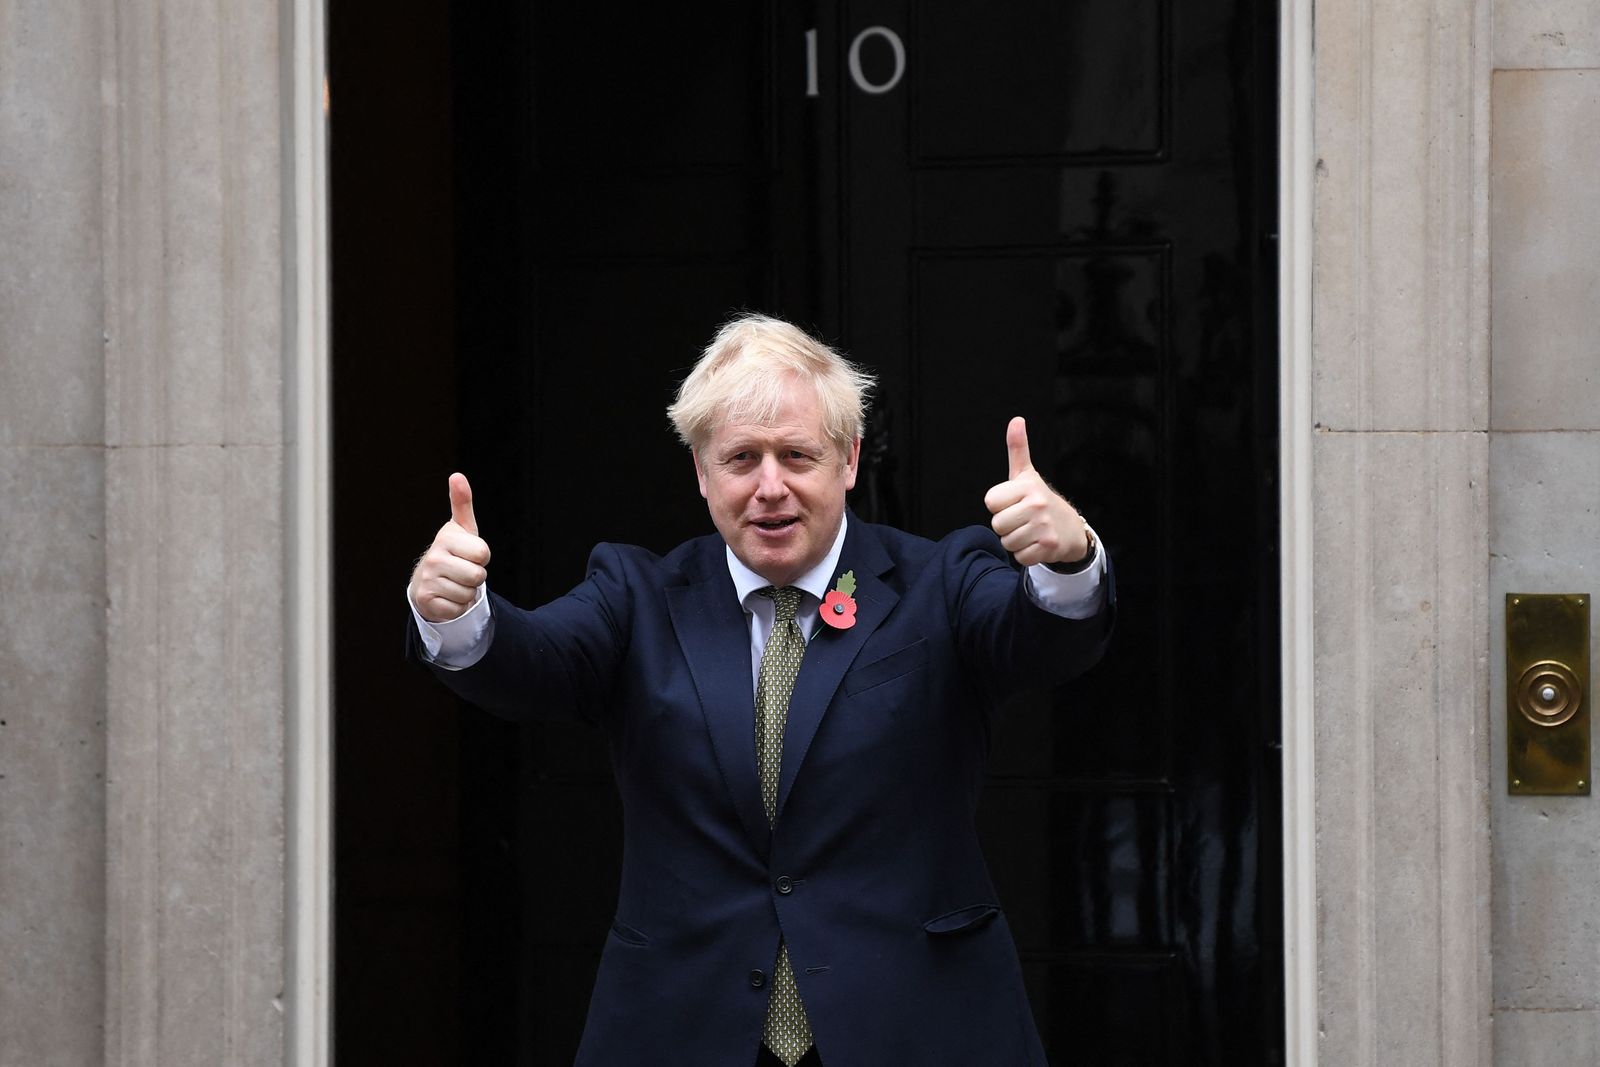 (FILES) In this file photo taken on October 23, 2020 Britain's Prime Minister Boris Johnson gestures as he meets with fundraisers for the Royal British Legion and service personnel, outside number 10 Downing Street as the British public is being urged to find new ways to support this year's Poppy Appeal during the novel coronavirus COVID-19 pandemic. - Britain's Prime Minister Boris Johnson wins Tory party no-confidence vote on June 6, 2022. (Photo by Daniel LEAL / AFP) - AFP